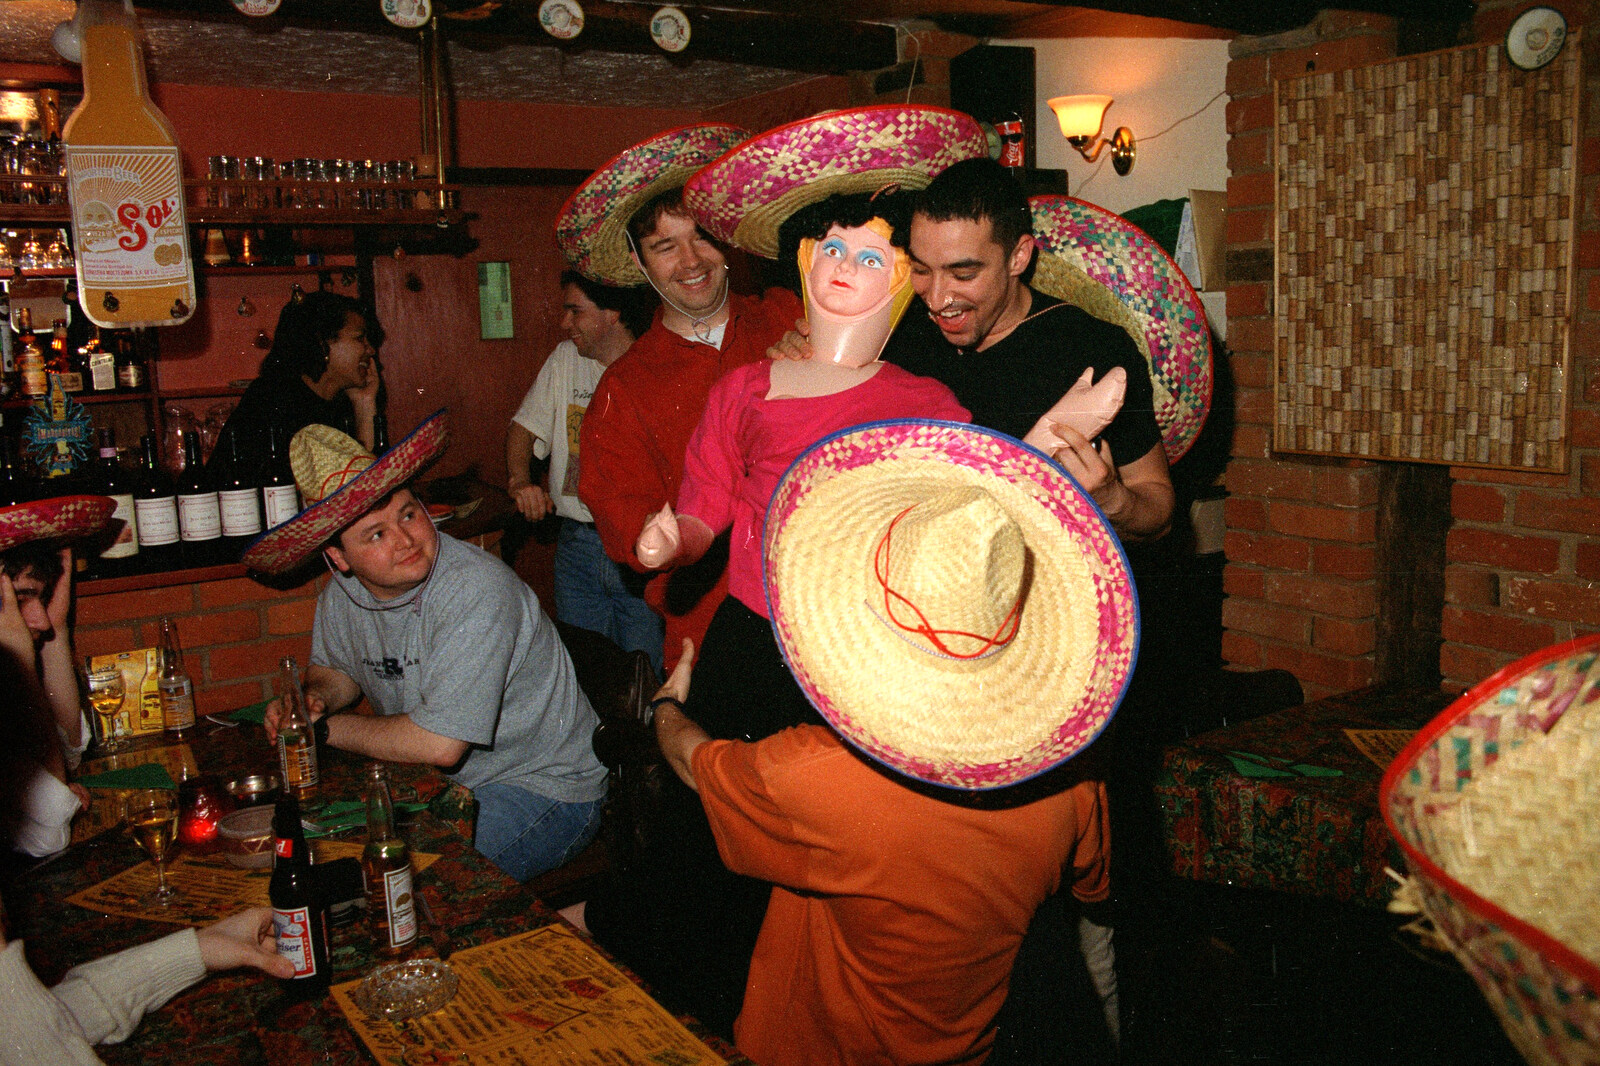 CISU, Los Mexicanos and the Inflatable Woman, Ipswich, Suffolk - 25th April 1996: The inflatable woman has a sombrero on